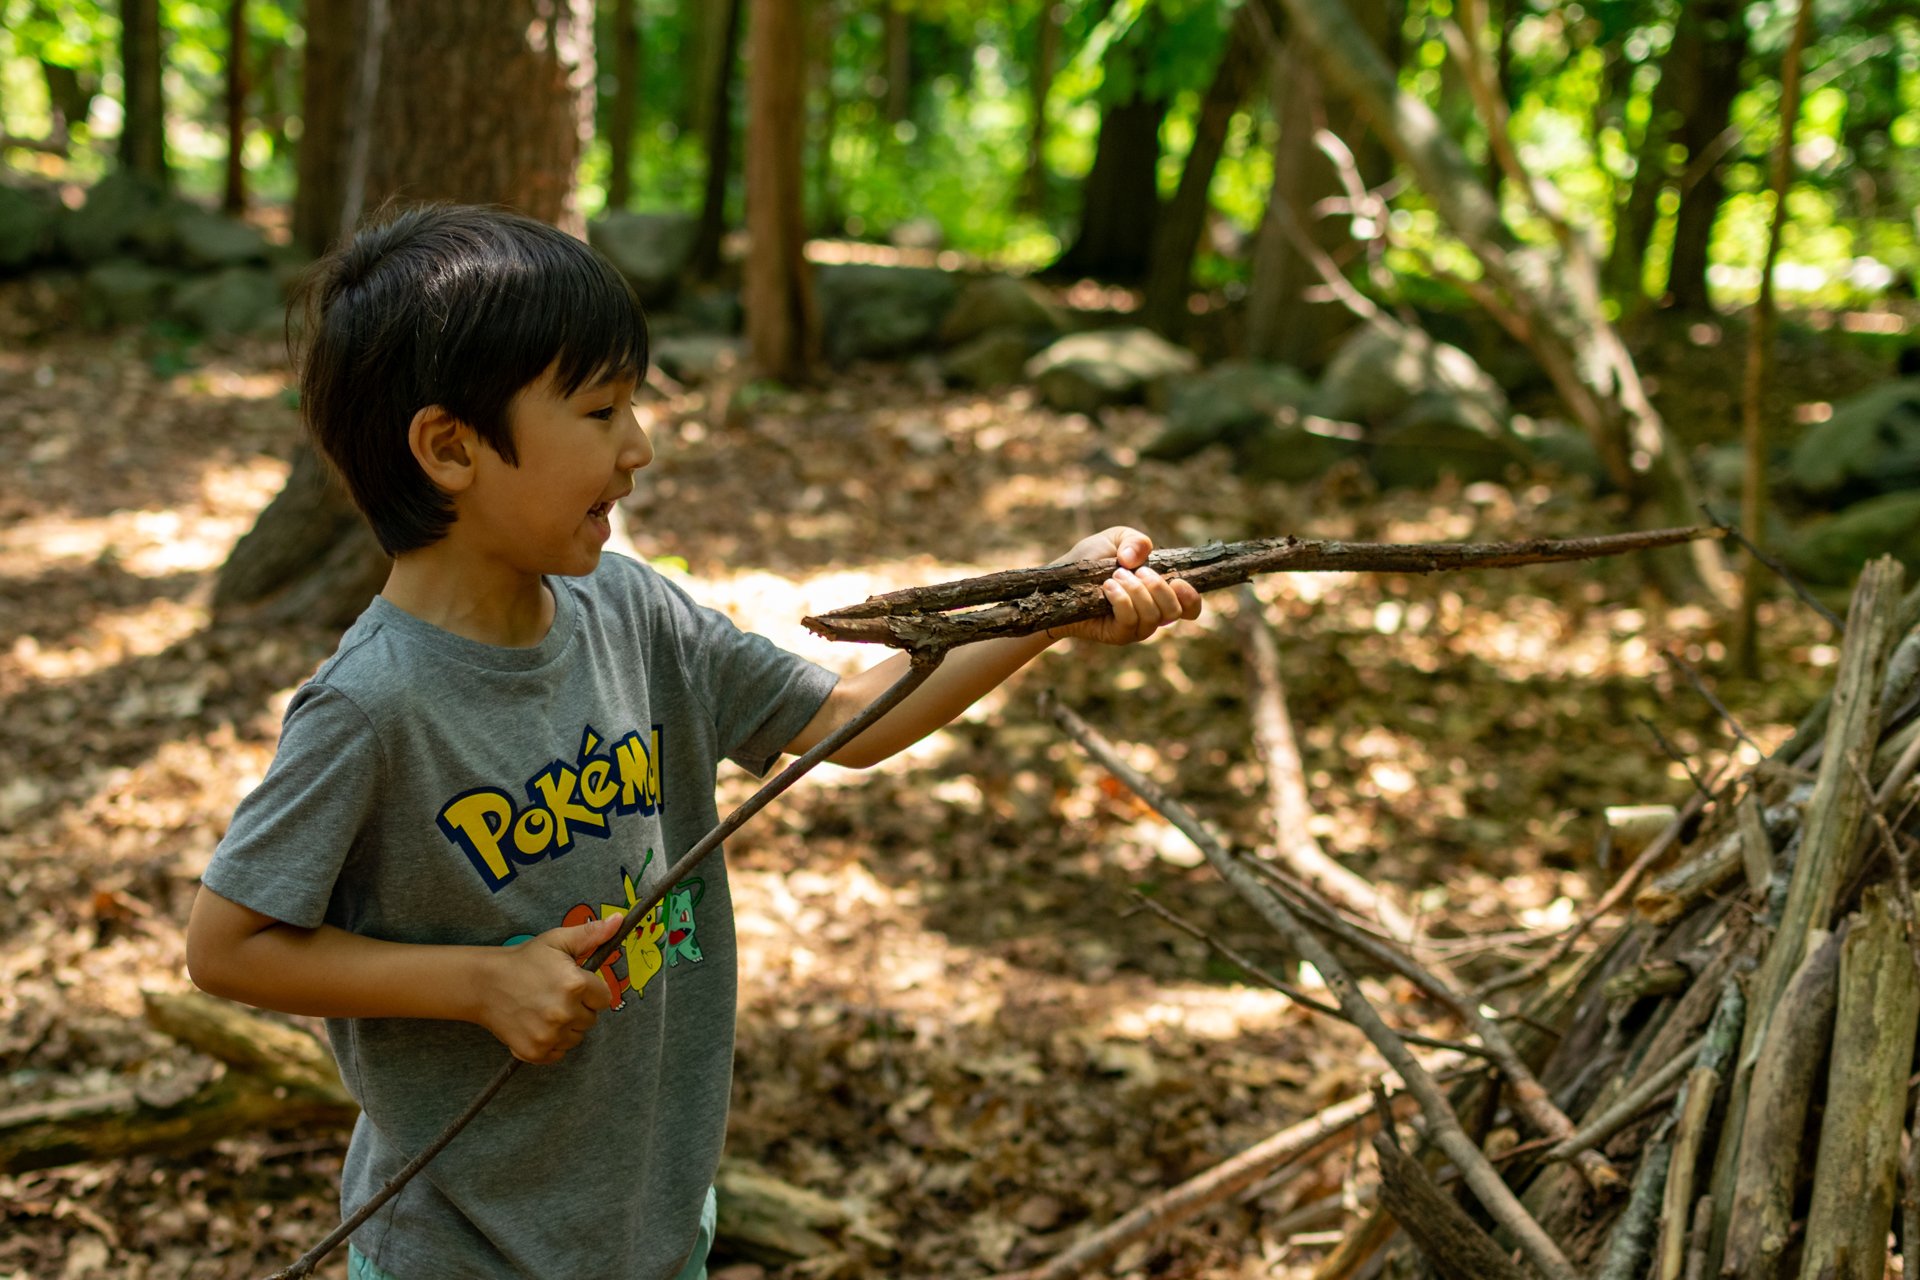 A camper at Habitat Nature Camp inspecting a branch before he adds it to his shelter in the woods